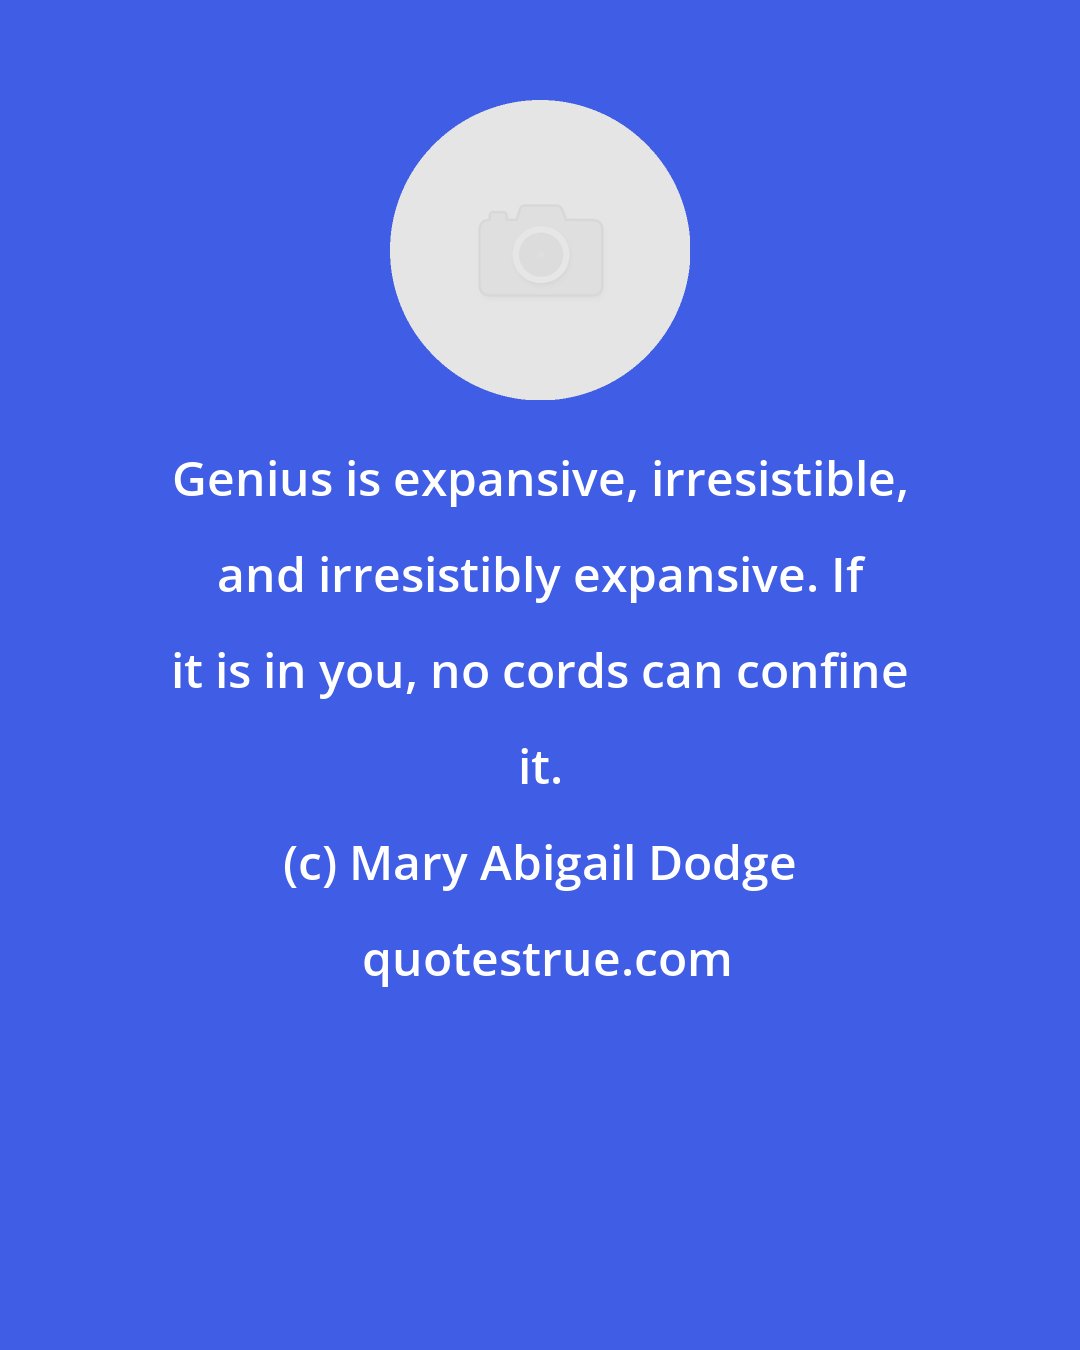 Mary Abigail Dodge: Genius is expansive, irresistible, and irresistibly expansive. If it is in you, no cords can confine it.